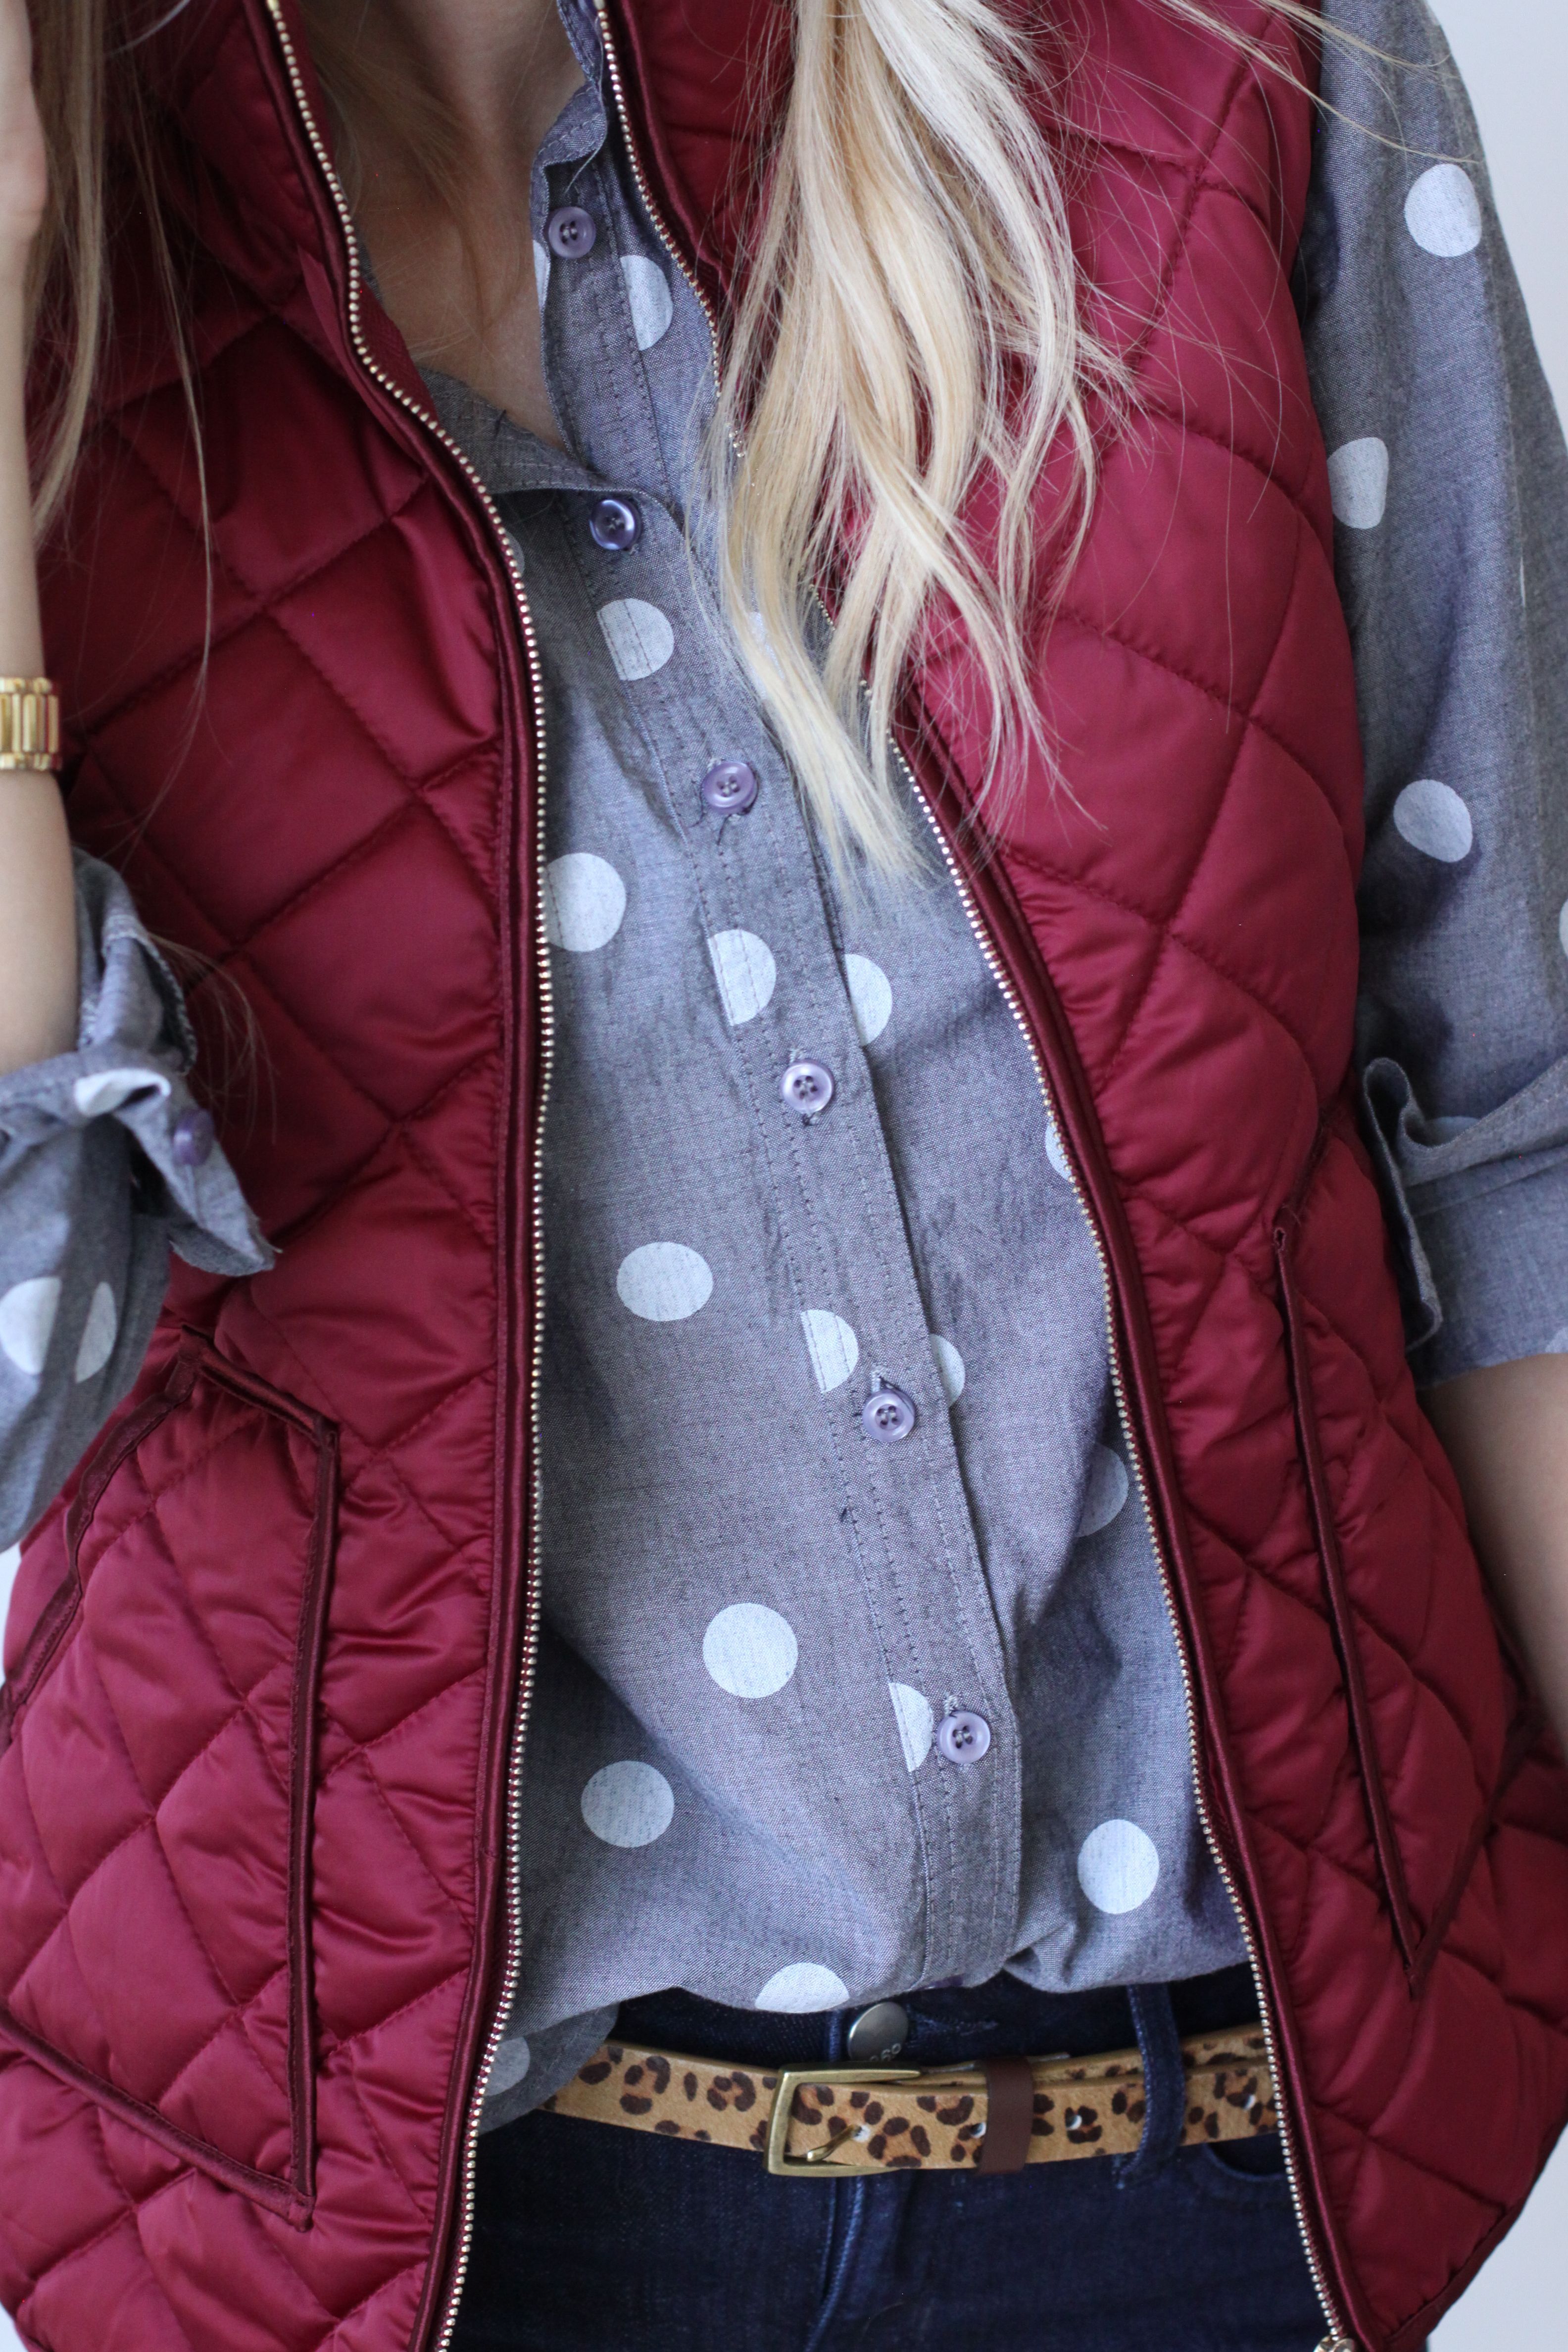 LOVE the polka dots and burgundy puffer vest.